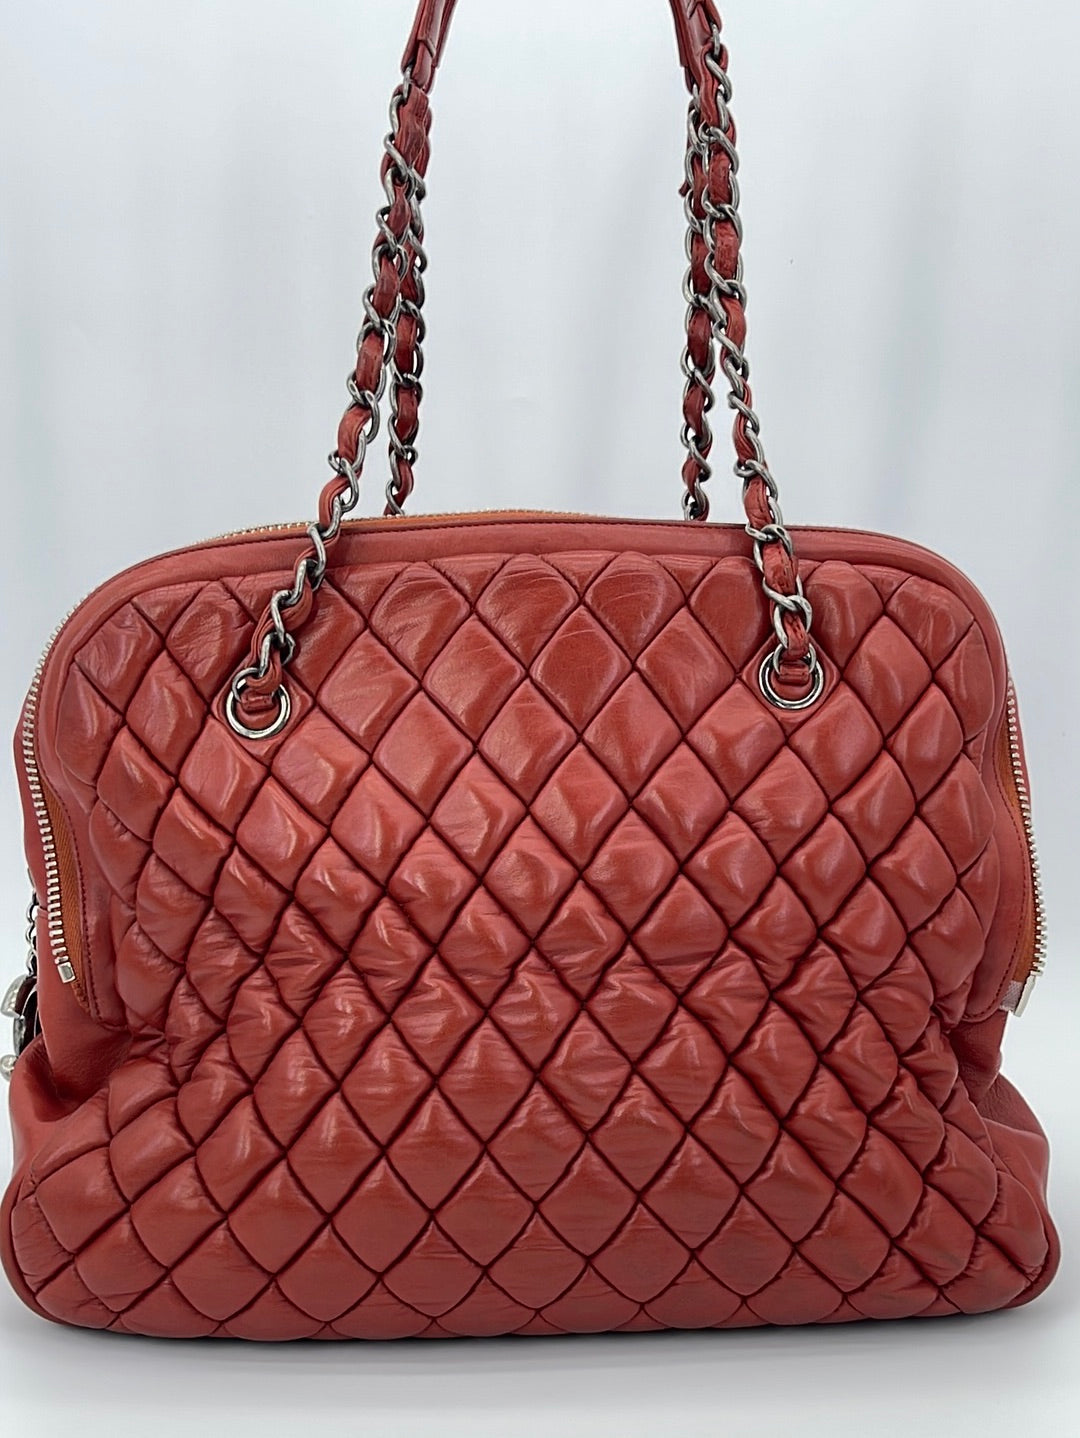 Preloved Chanel Red Leather Double Stitch Zip Around Chain Hobo Bag  11407854 051723 - $400 OFF LIGHTENING DEAL